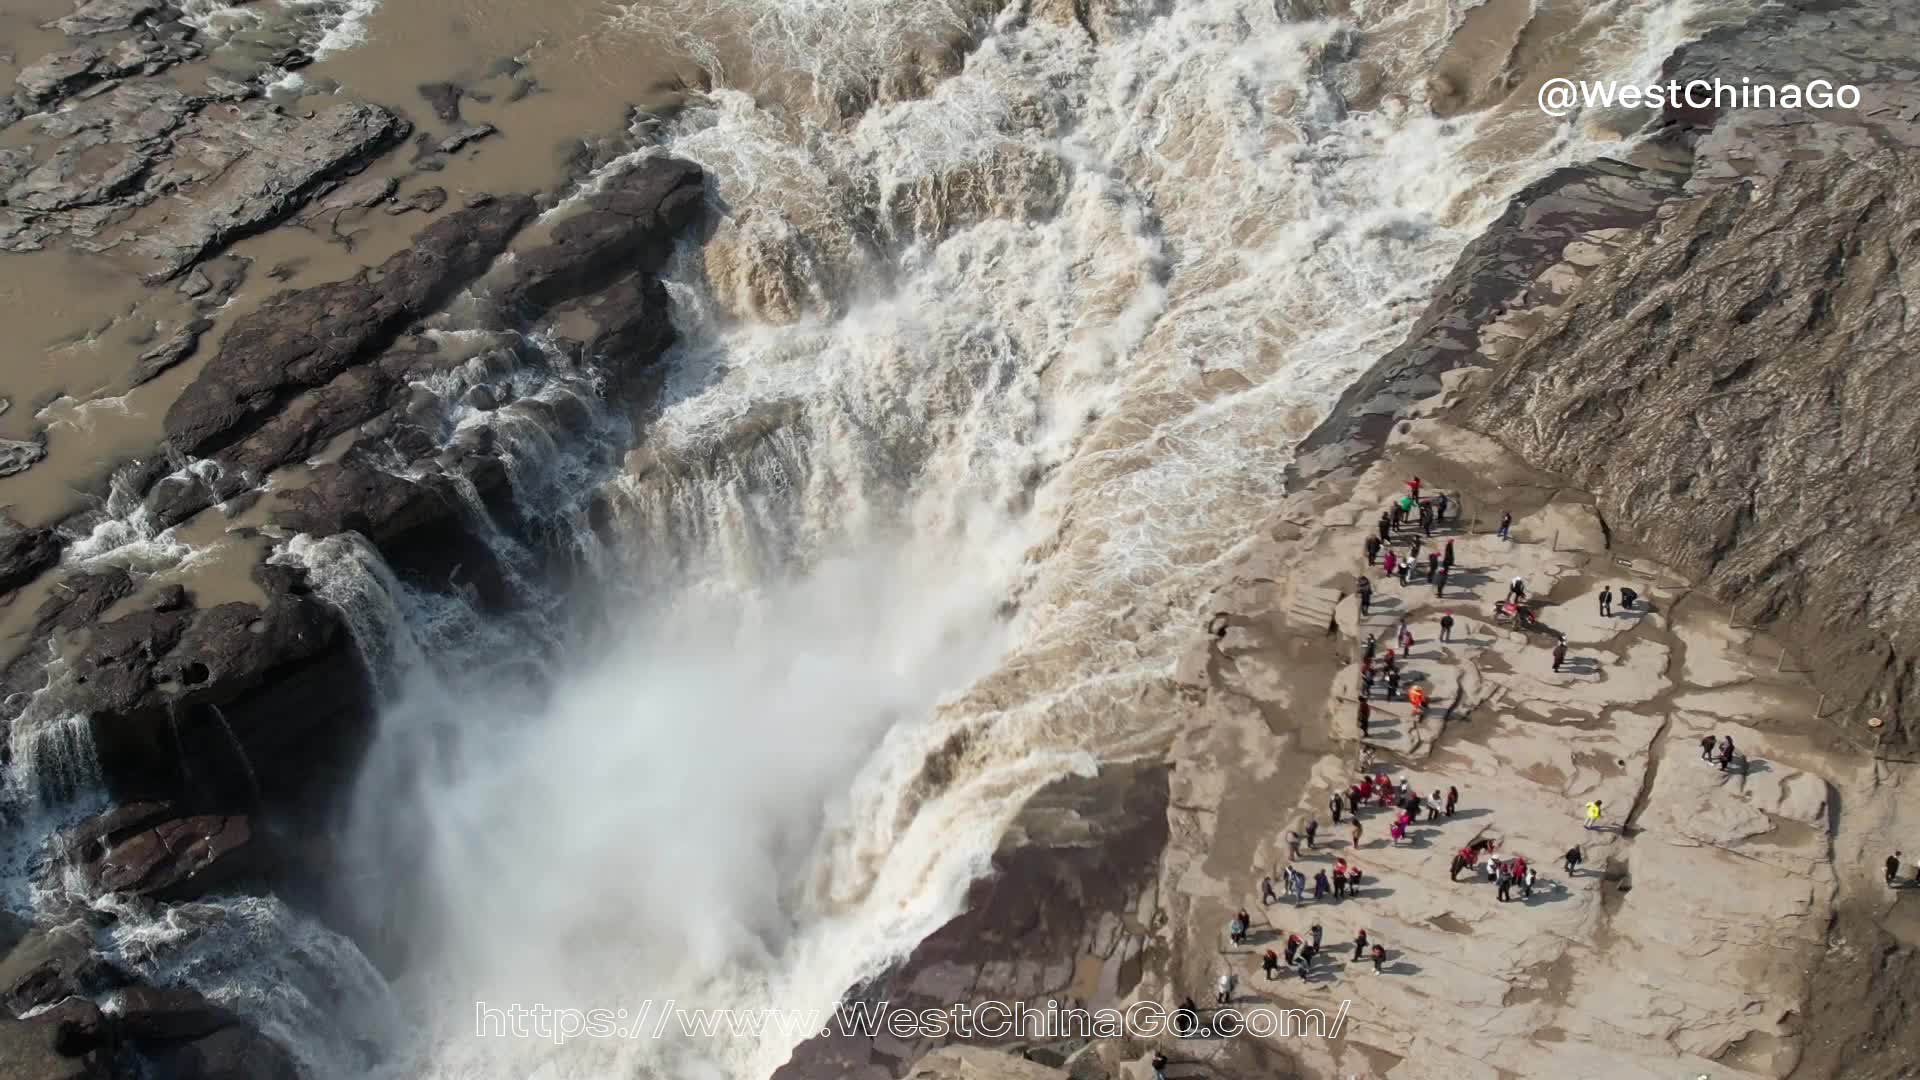 Hukou Waterfall on the Yellow River